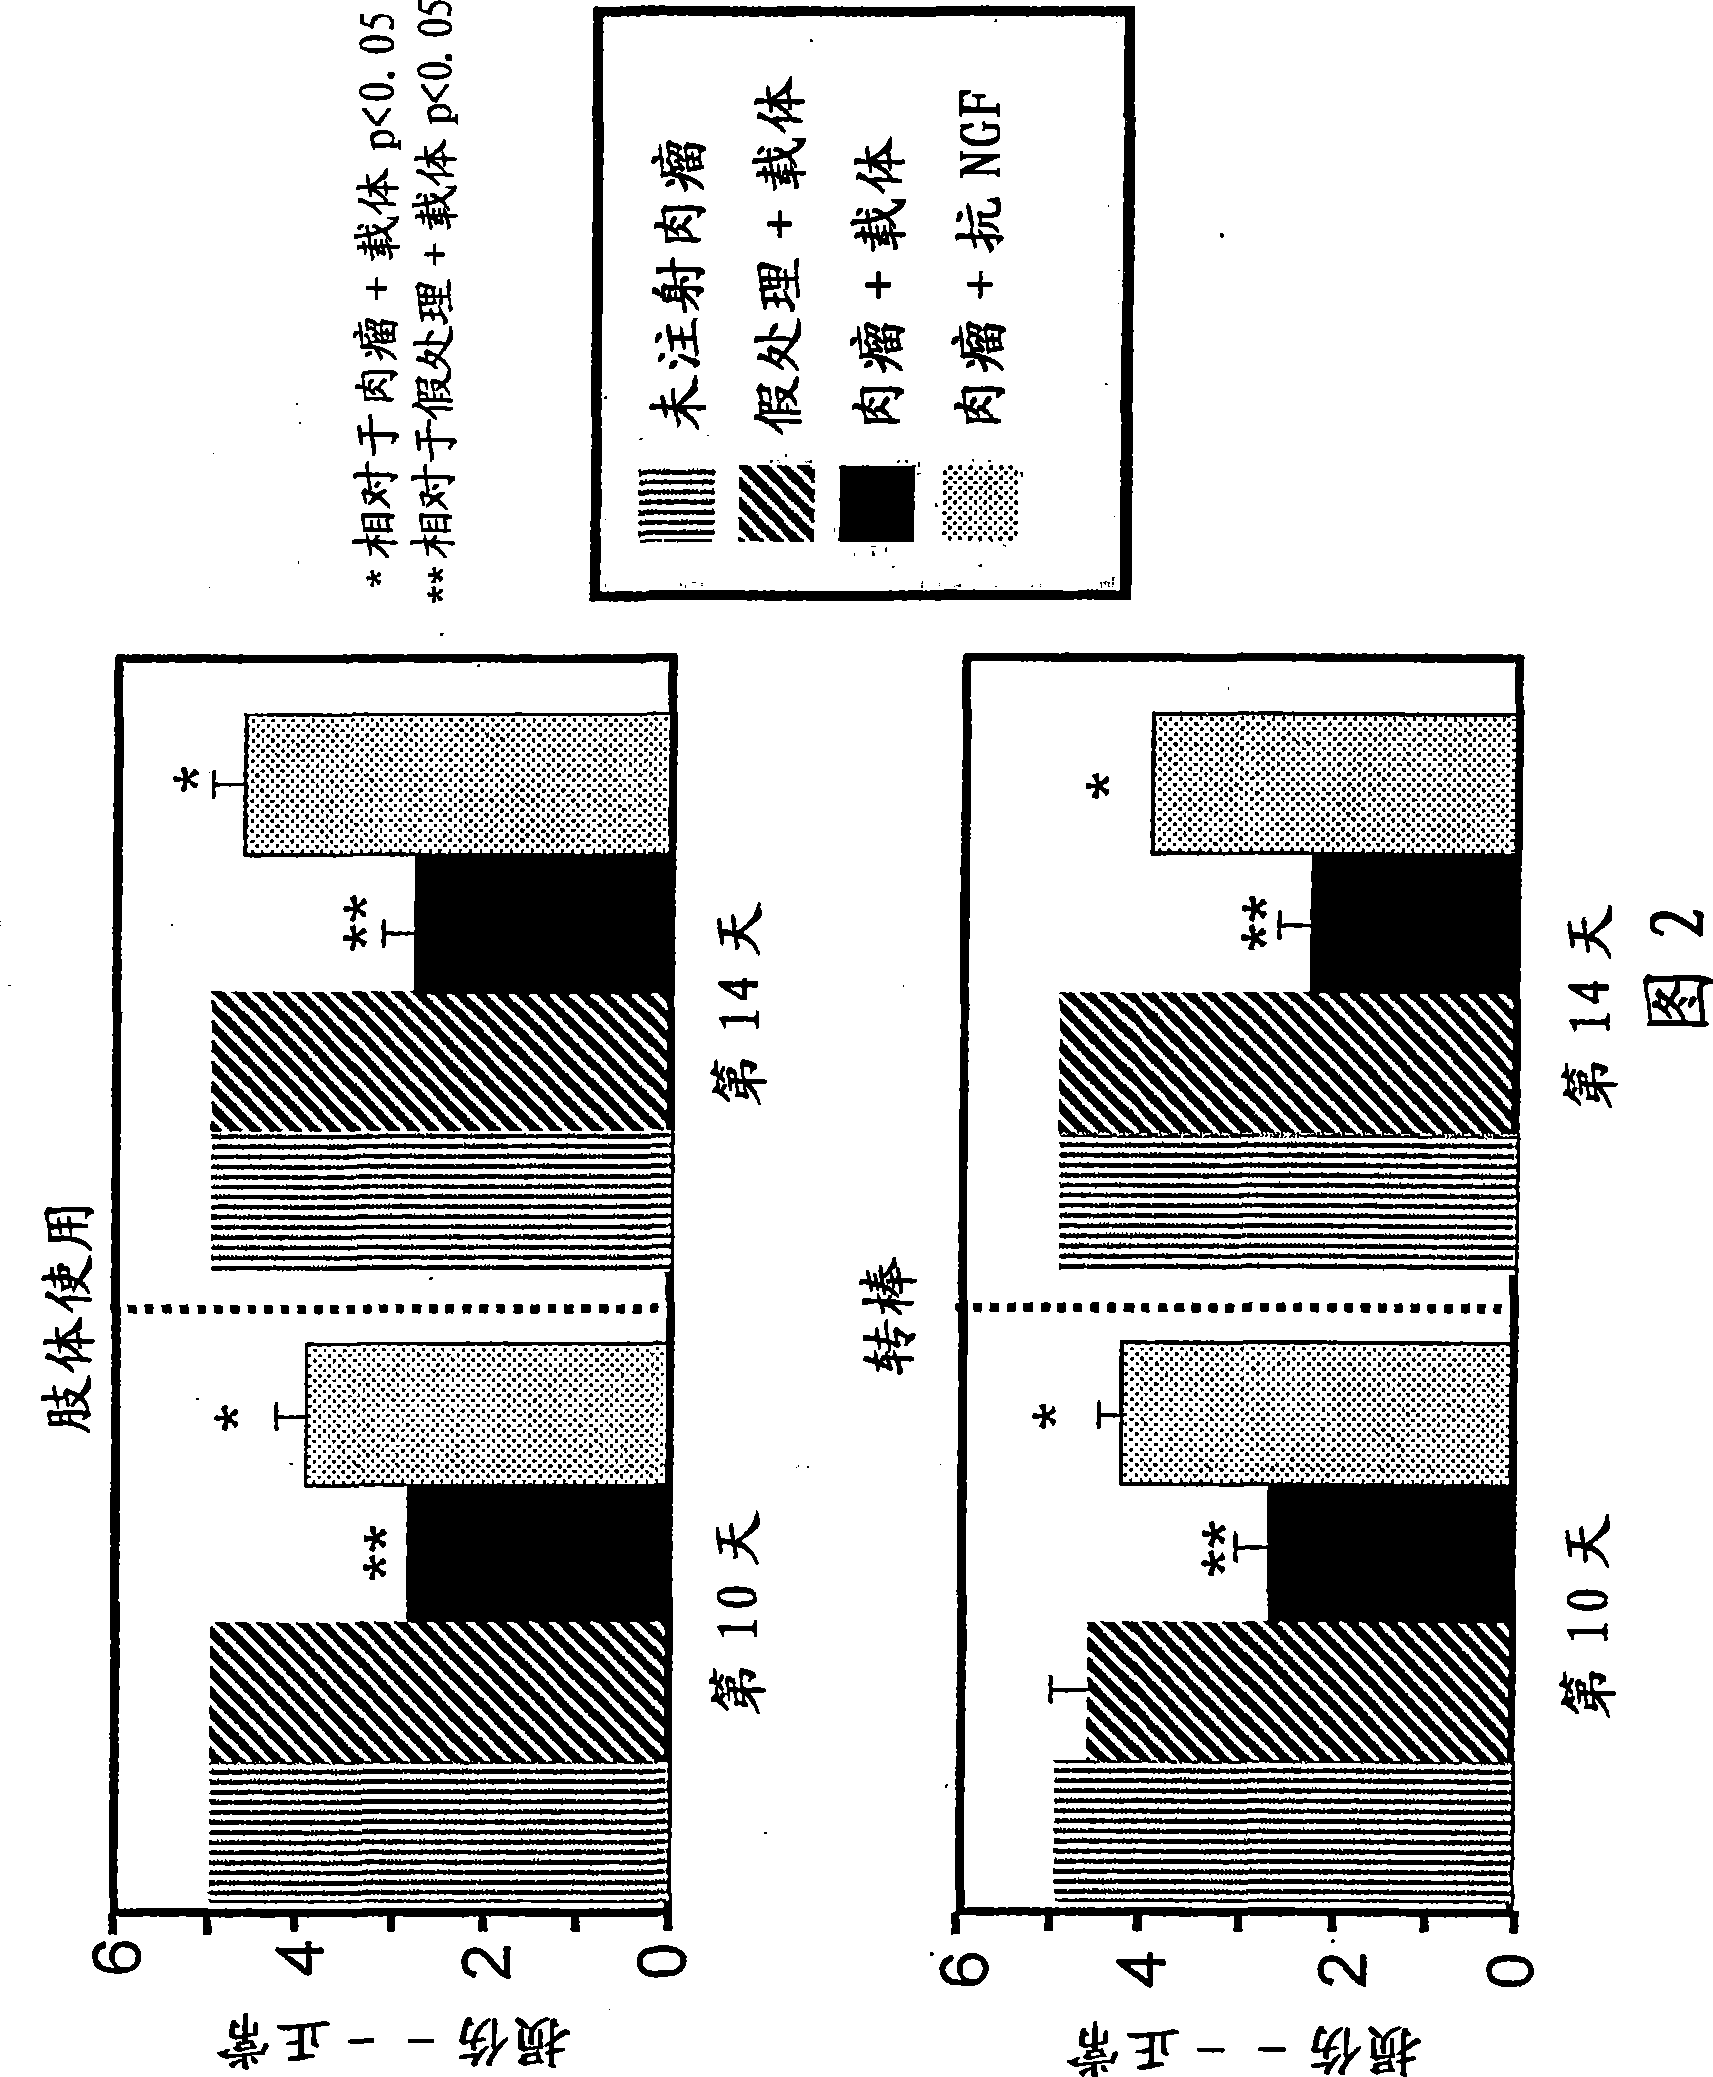 Methods for treating bone cancer pain by administering a nerve growth factor antagonist